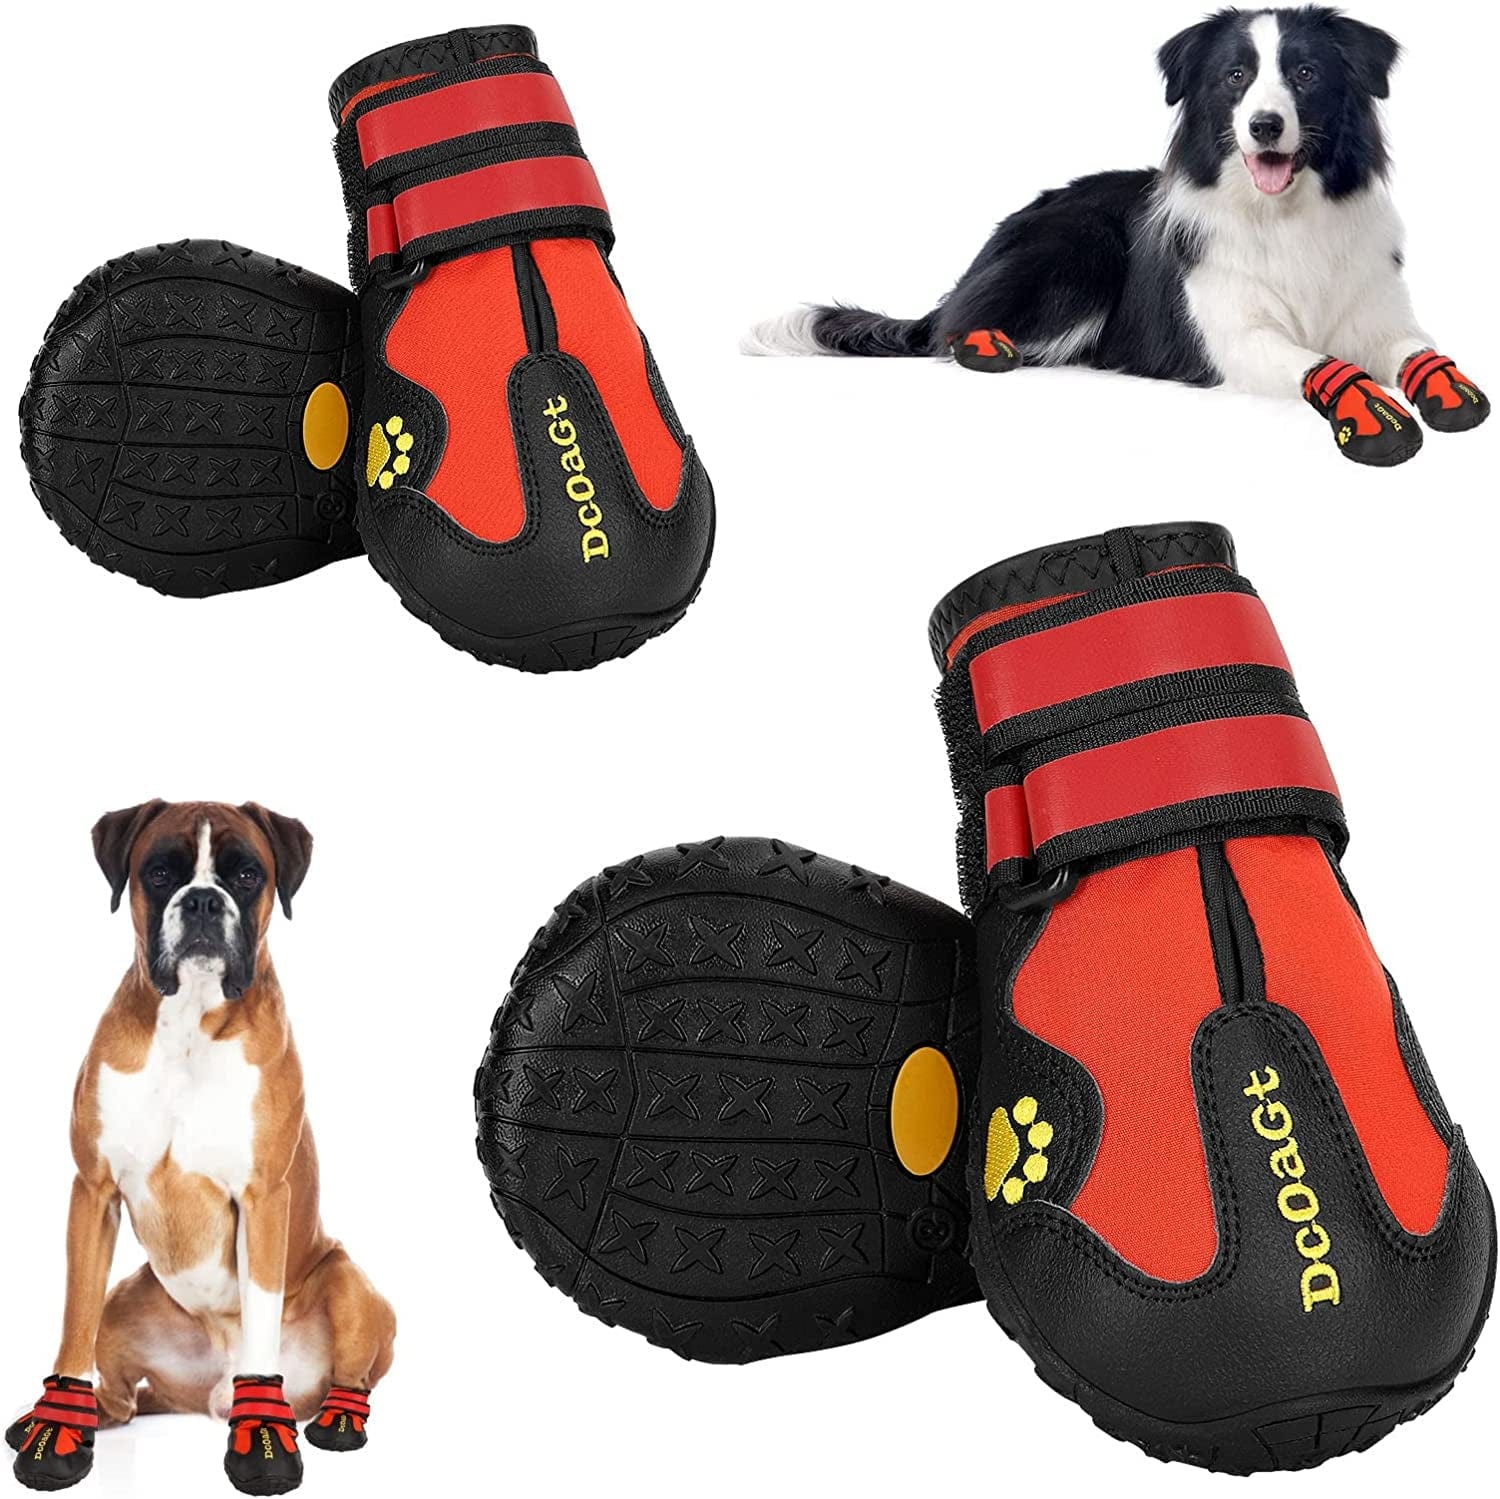  DcOaGt Dog Shoes for Large Dogs, Waterproof Anti-Slip Dog Boots  & Paw Protectors for Summer Hot Pavement Winter Snow, Breathable and  Reflective Dog Booties for Hiking/Walking/Outdoor/Floor : Pet Supplies